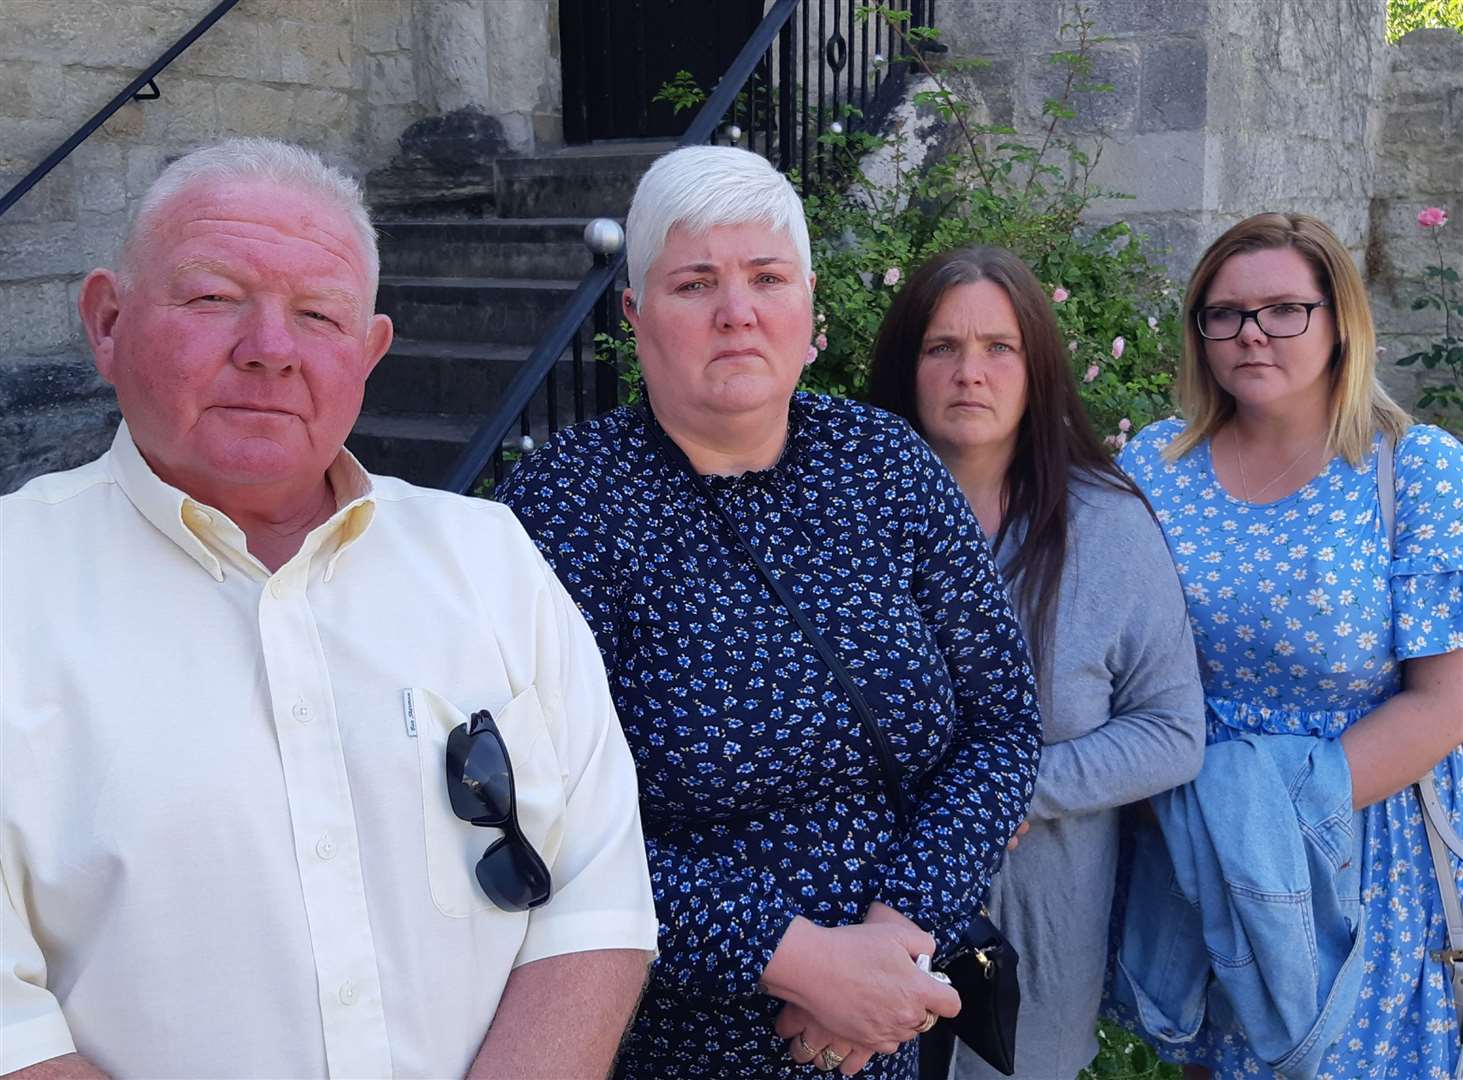 Alex Holland's parents Mark and Rachel Holland and his sisters Louise Coleman and Victoria Holland-Bastable outside the coroner's court at the end of last year's inquest